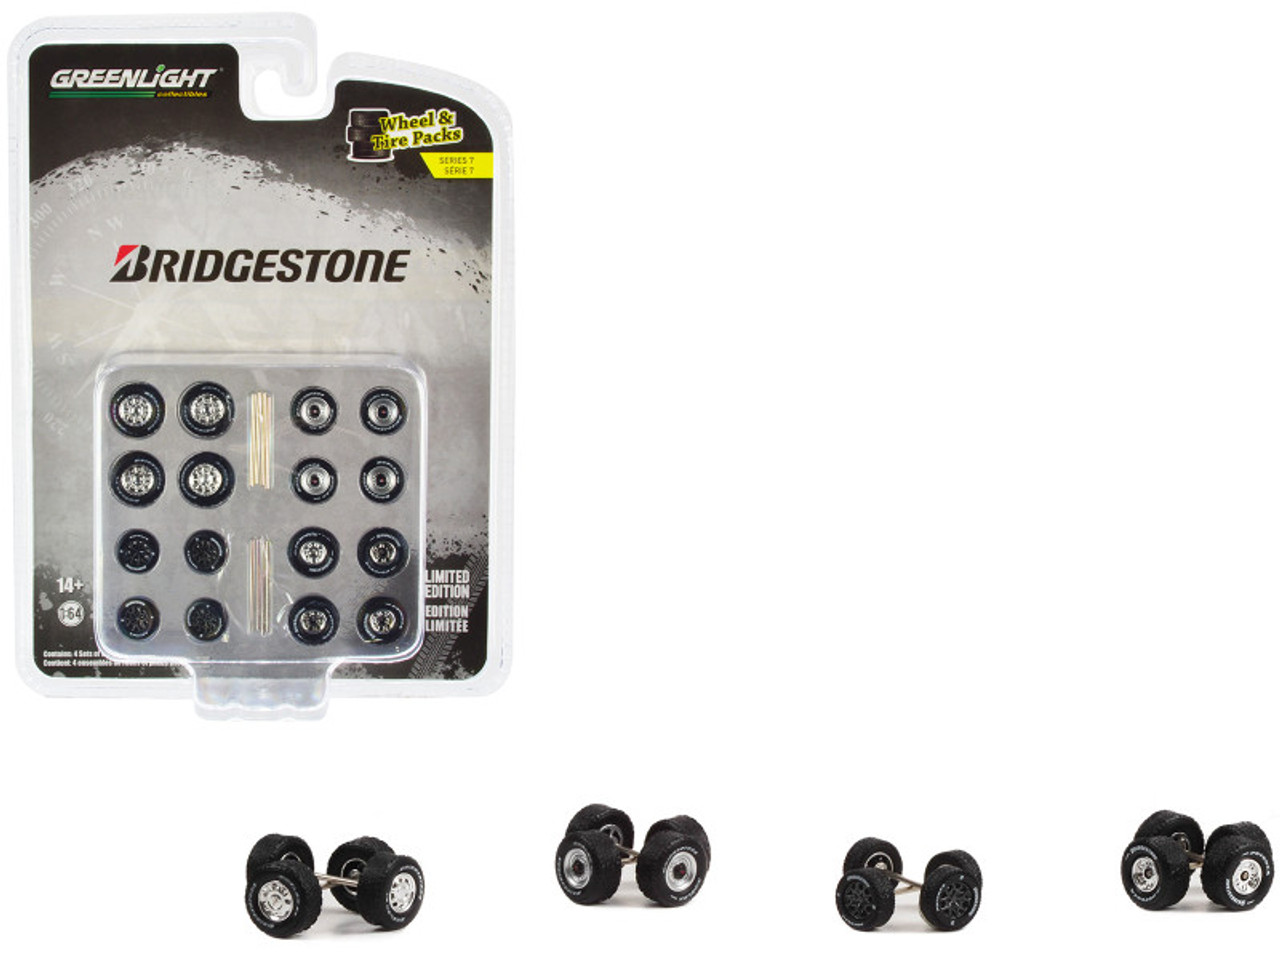 "Bridgestone Tires" Wheels and Tires Multipack Set of 24 pieces "Wheel & Tire Packs" Series 7 1/64 Scale Models by Greenlight